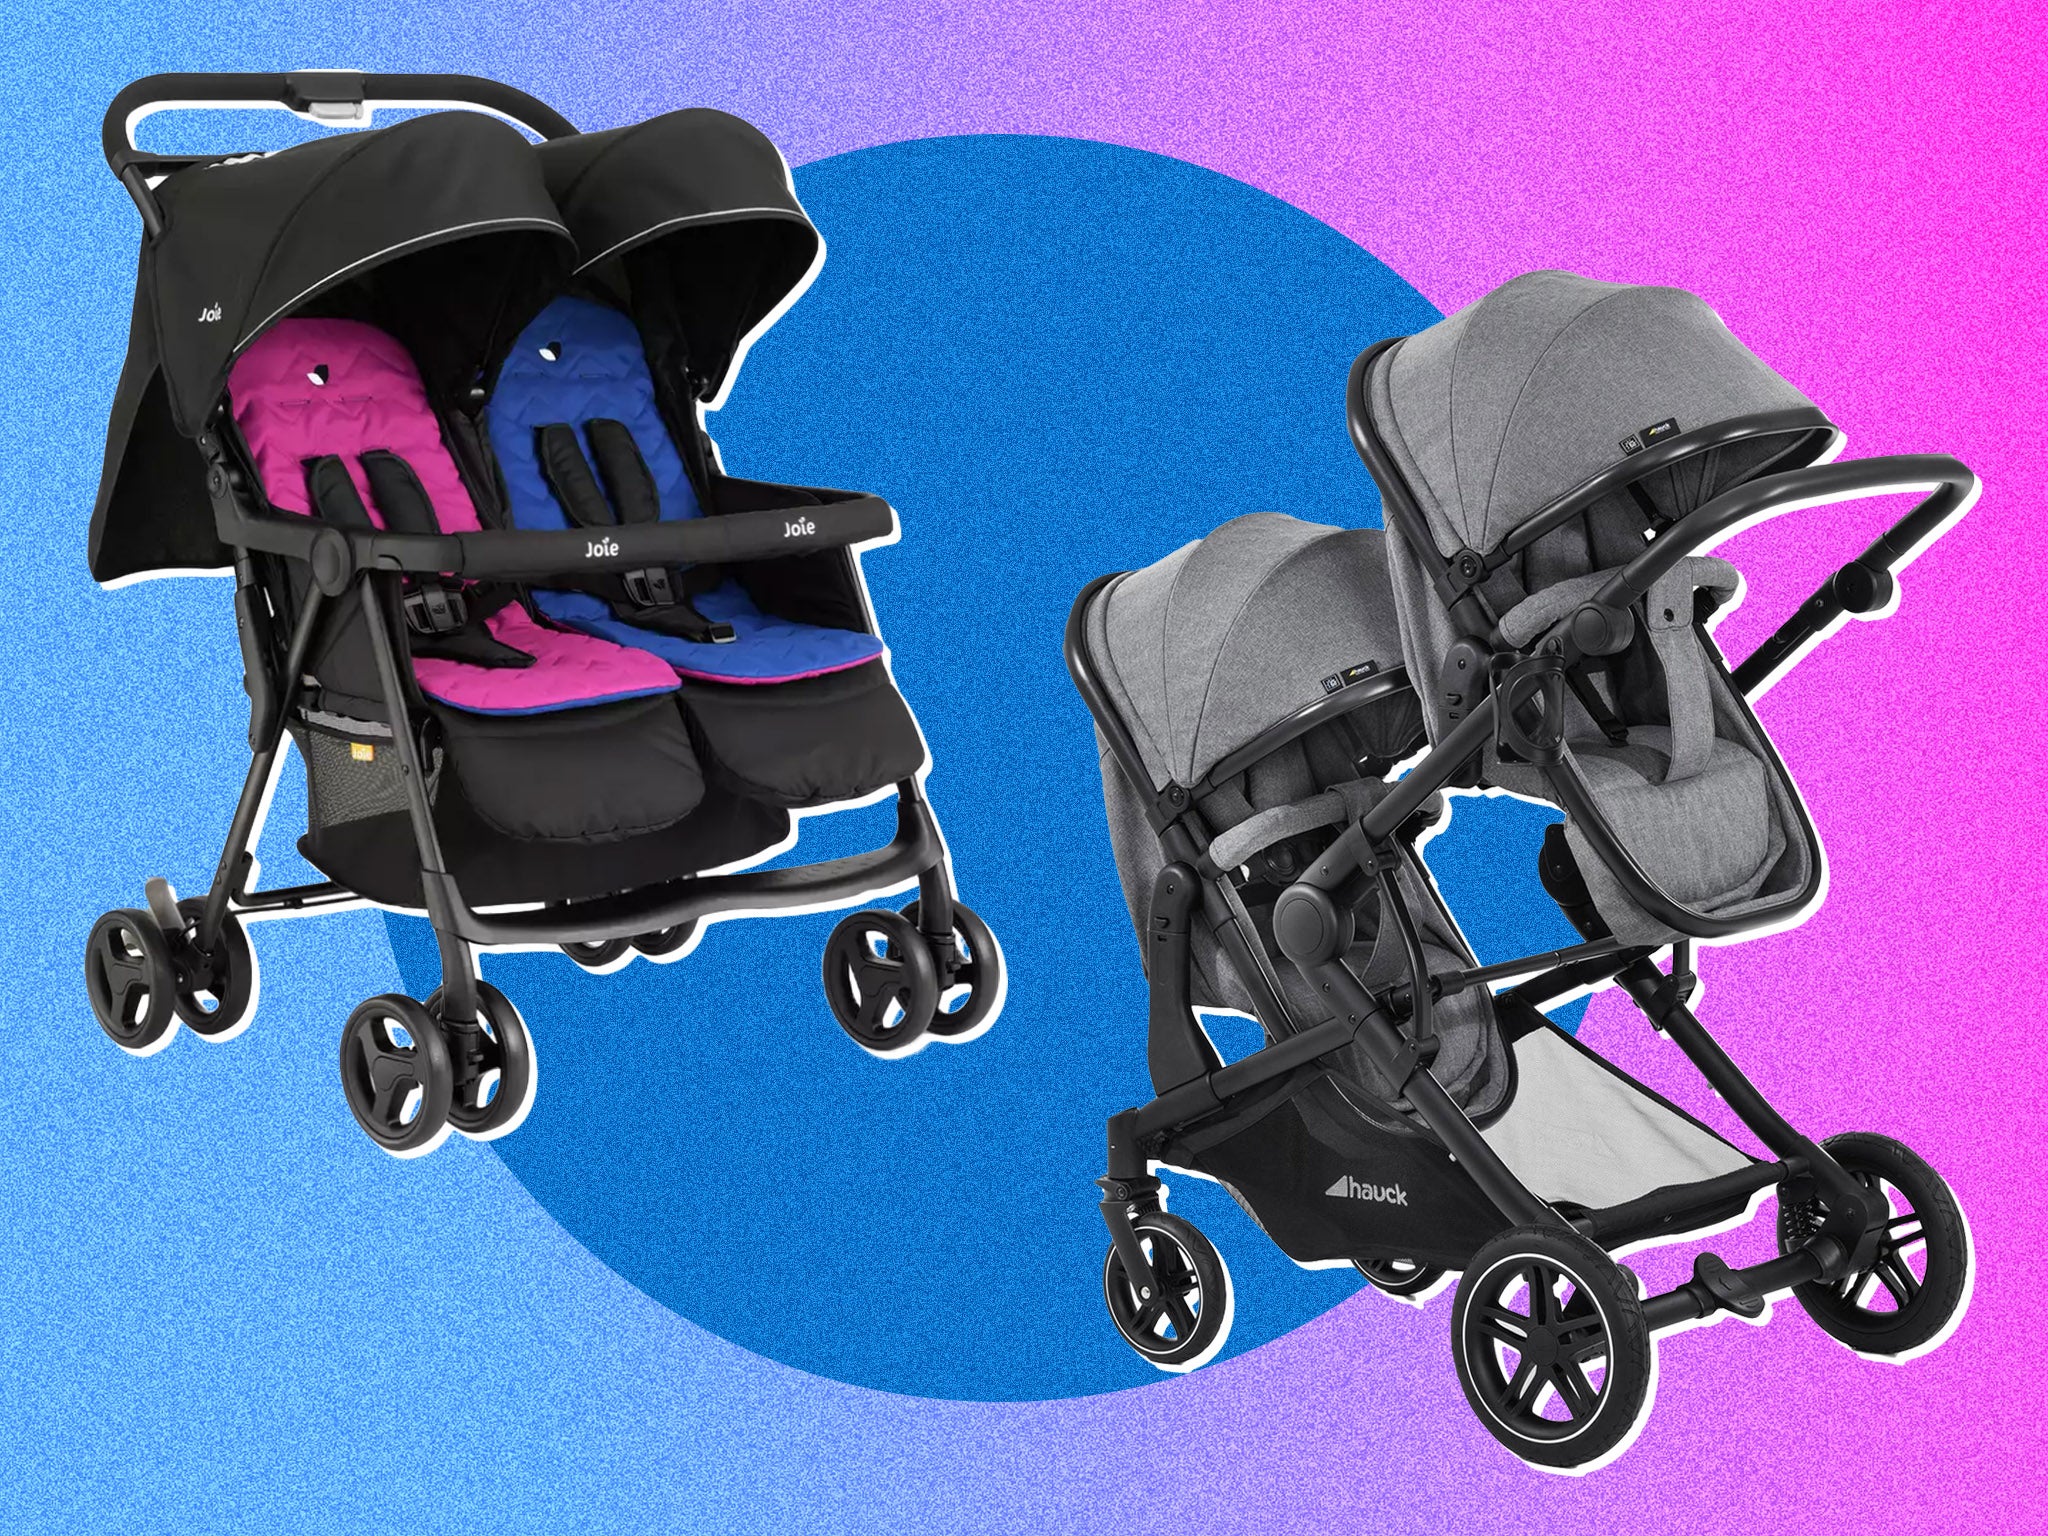 Side by side seats give a better view of little passengers while in-line pushchairs offer flexibility as they grow